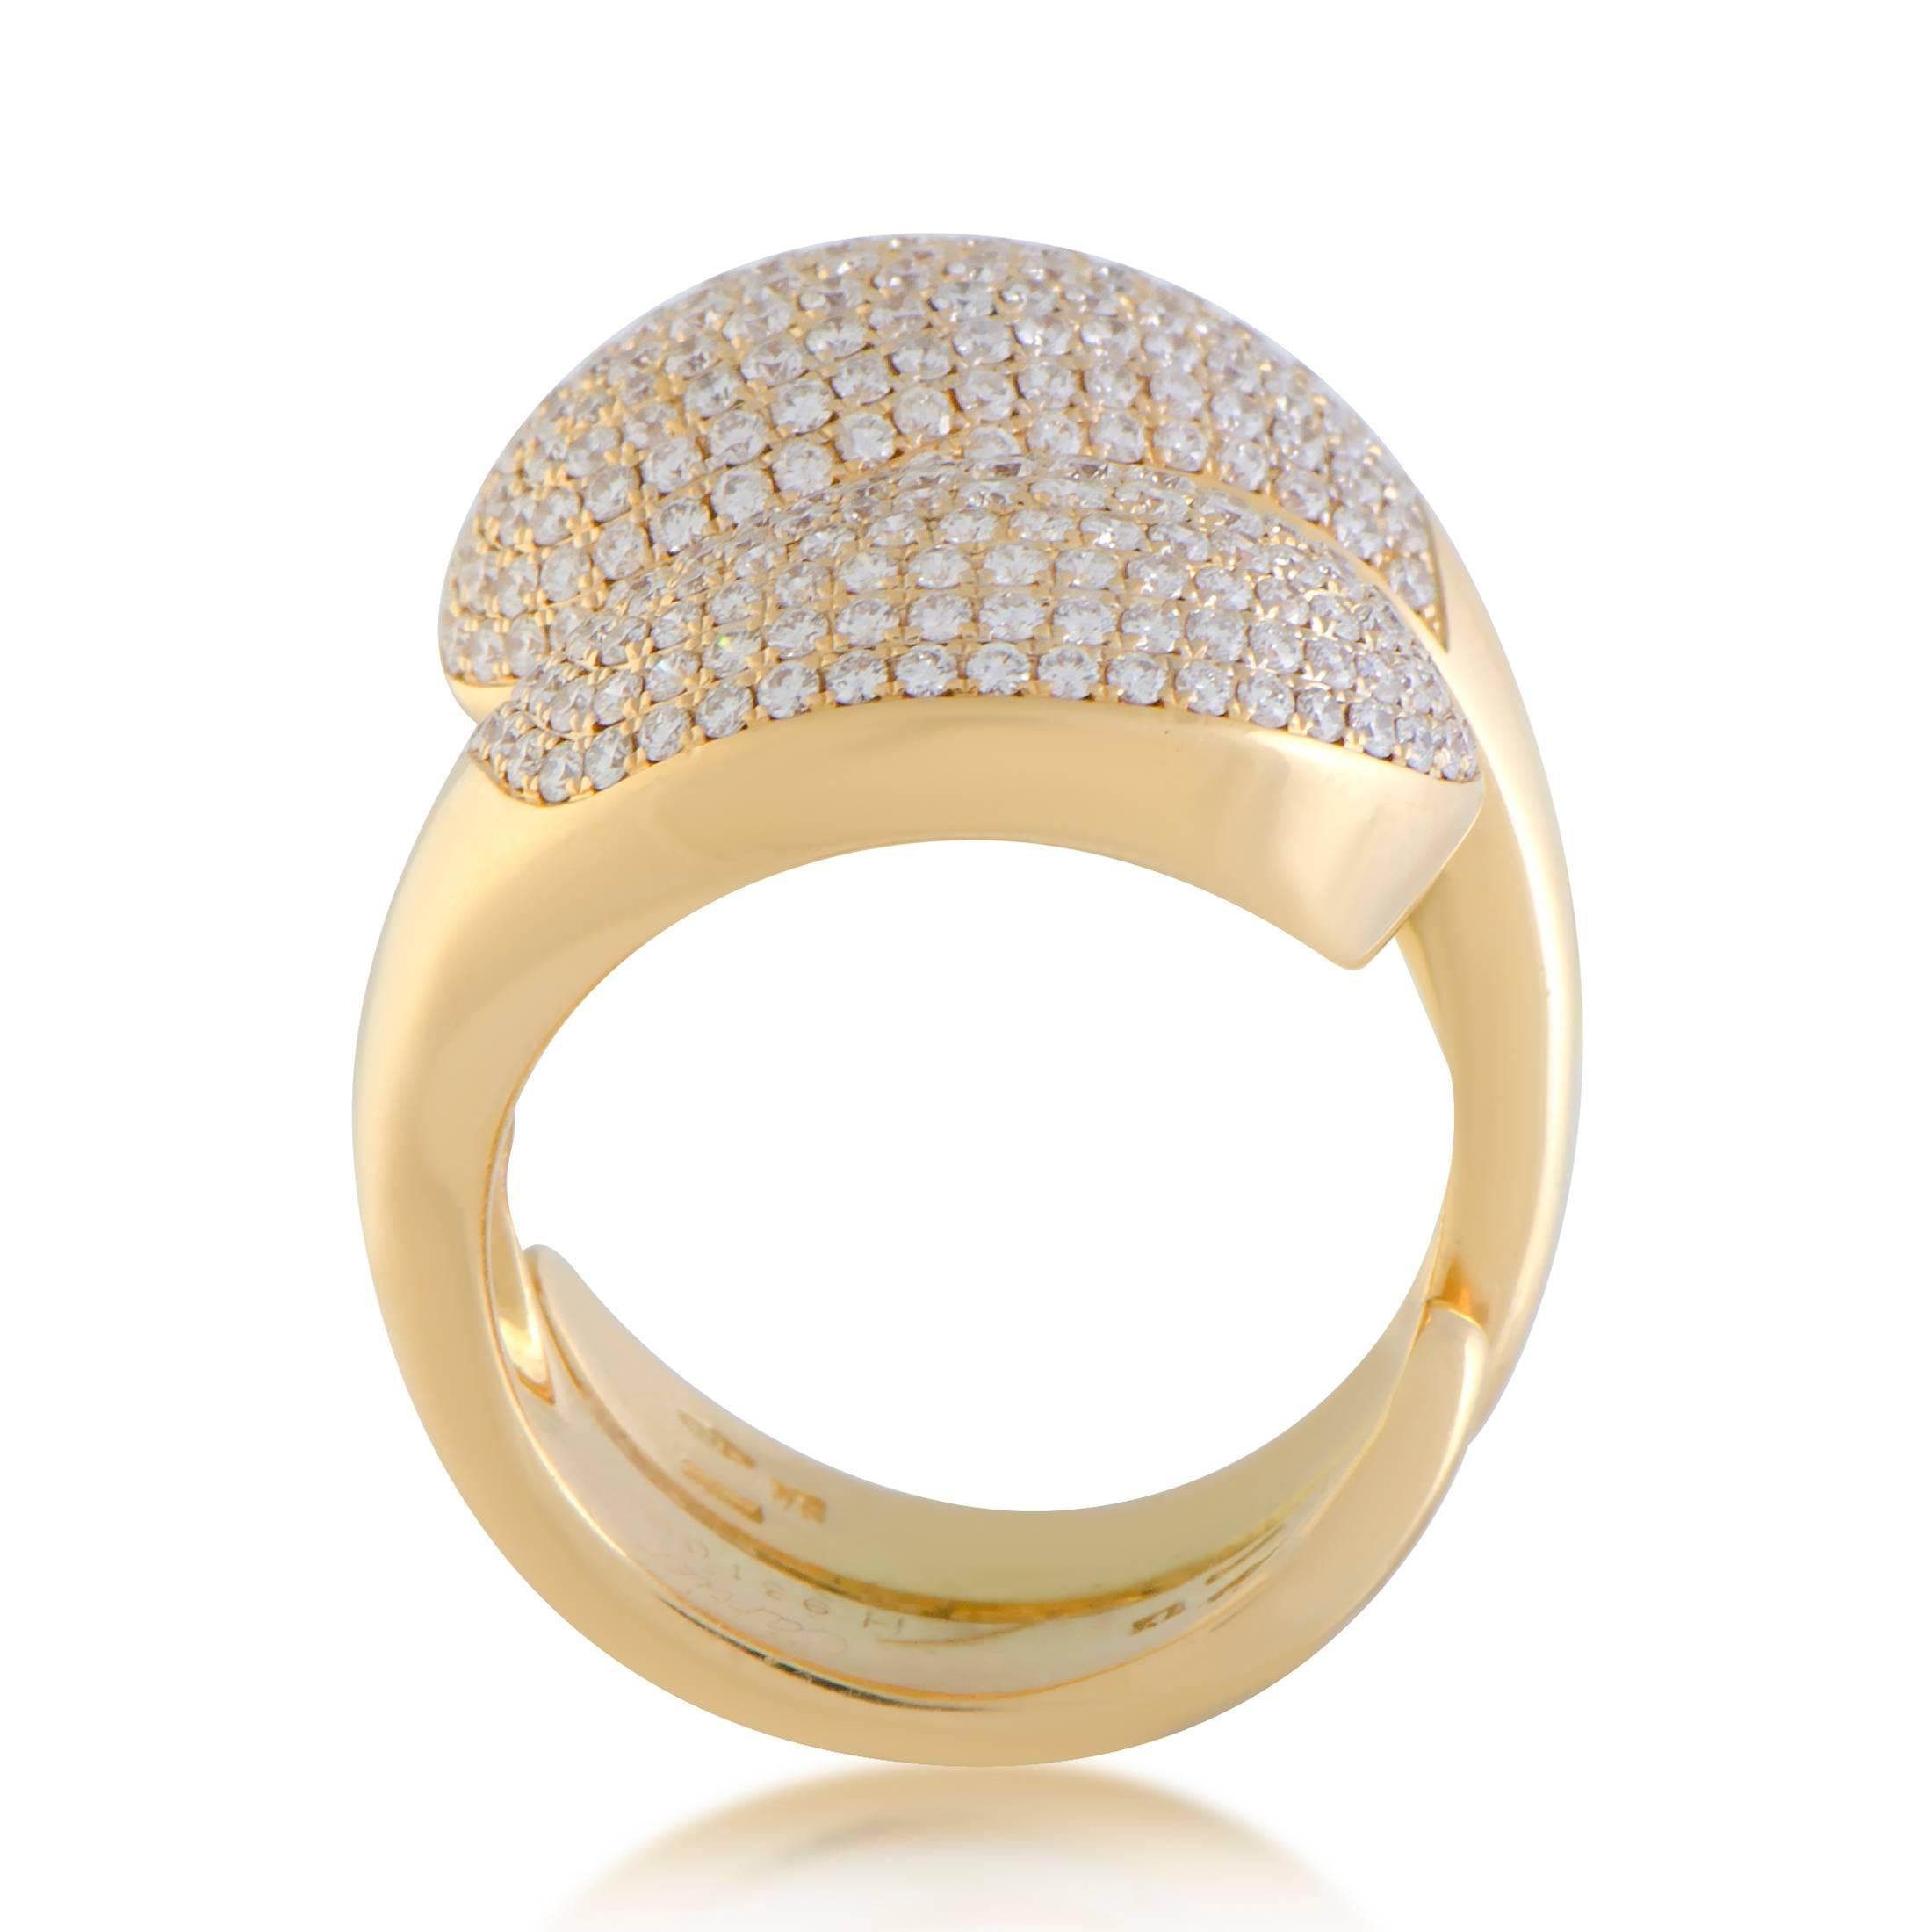 This stunning 18K yellow gold ring by Cartier perfectly epitomizes elegance and class. The spectacular Yin-Yang design is completely embellished with sparkling diamonds that give the ring an extravagantly stylish appeal.
Ring Size: 7
Ring Top